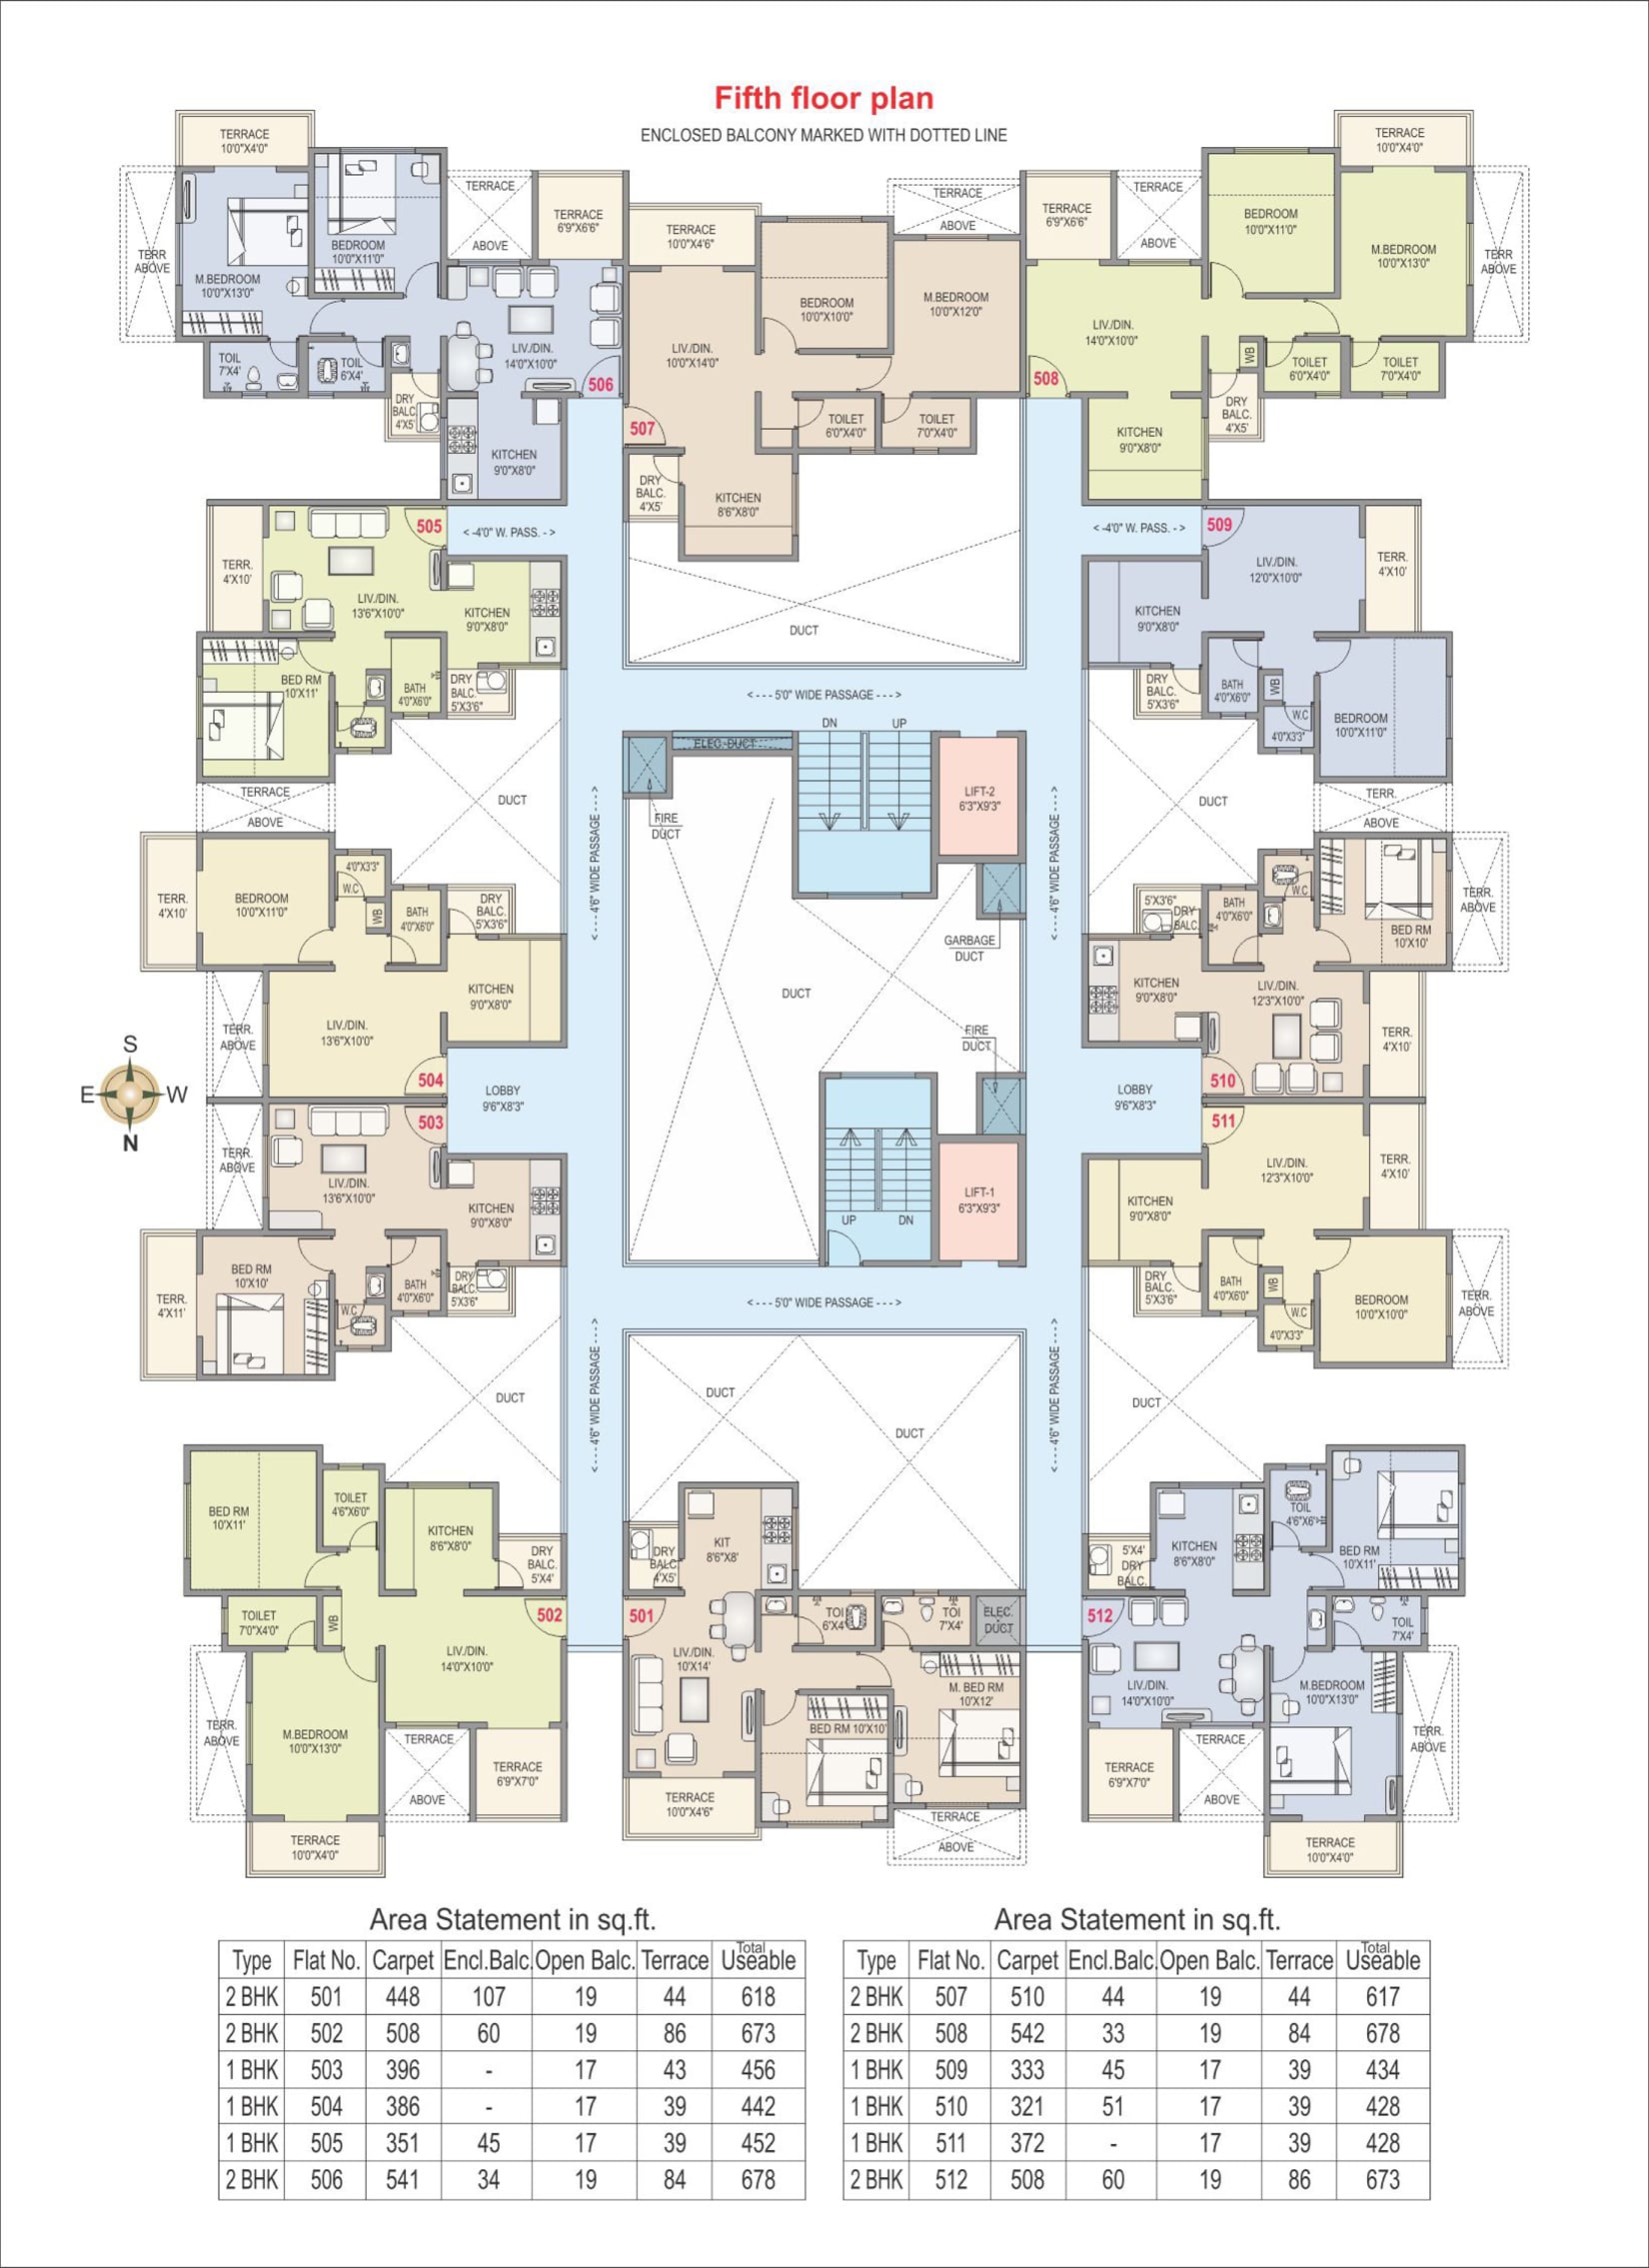 RKL Anand - Fifth Floor Plan